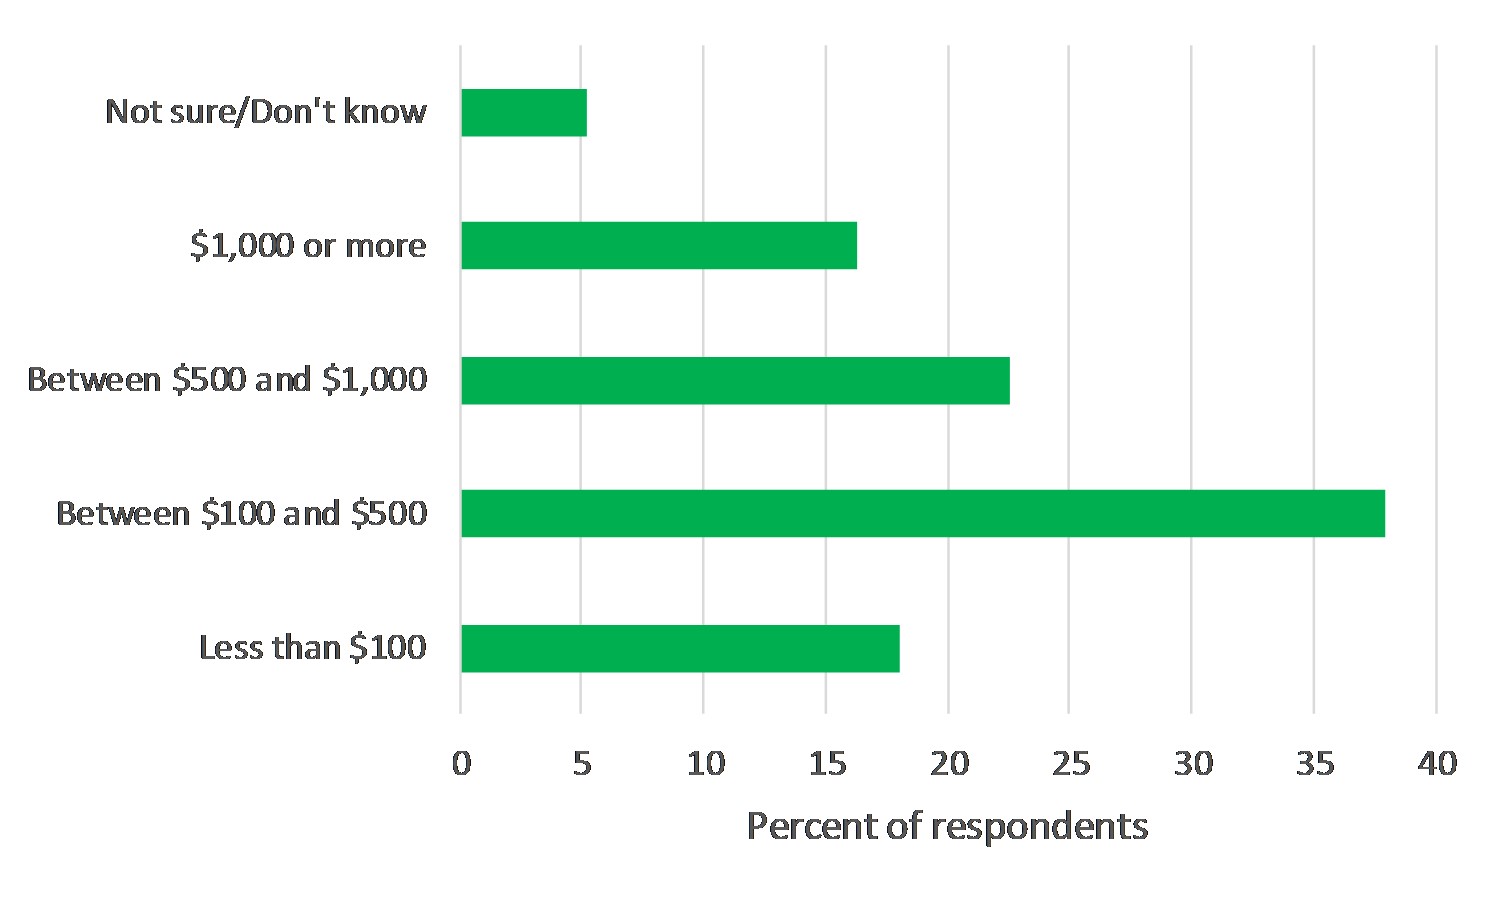 A bar chart showing the share of respondents who will spend in various monetary categories.